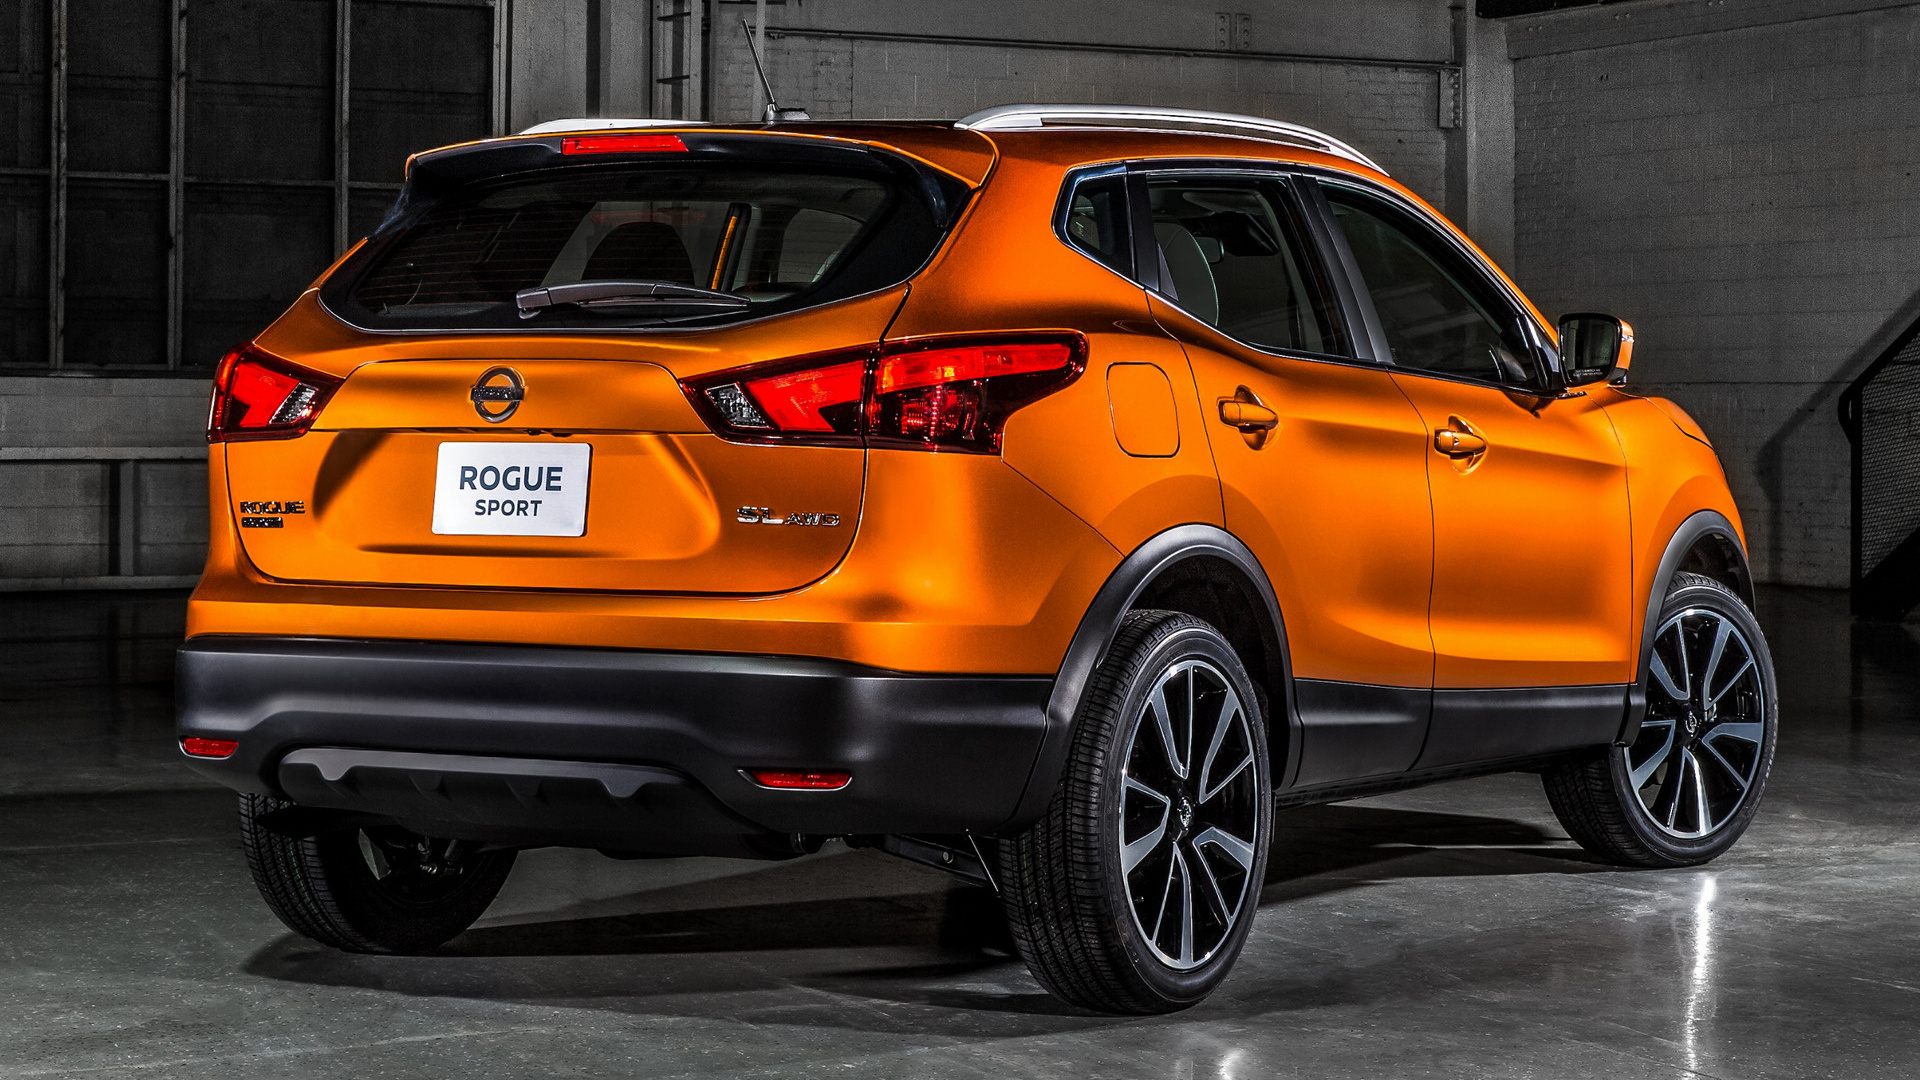 Nissan Rogue, Reliable SUV, Family-friendly, Advanced safety features, 1920x1080 Full HD Desktop